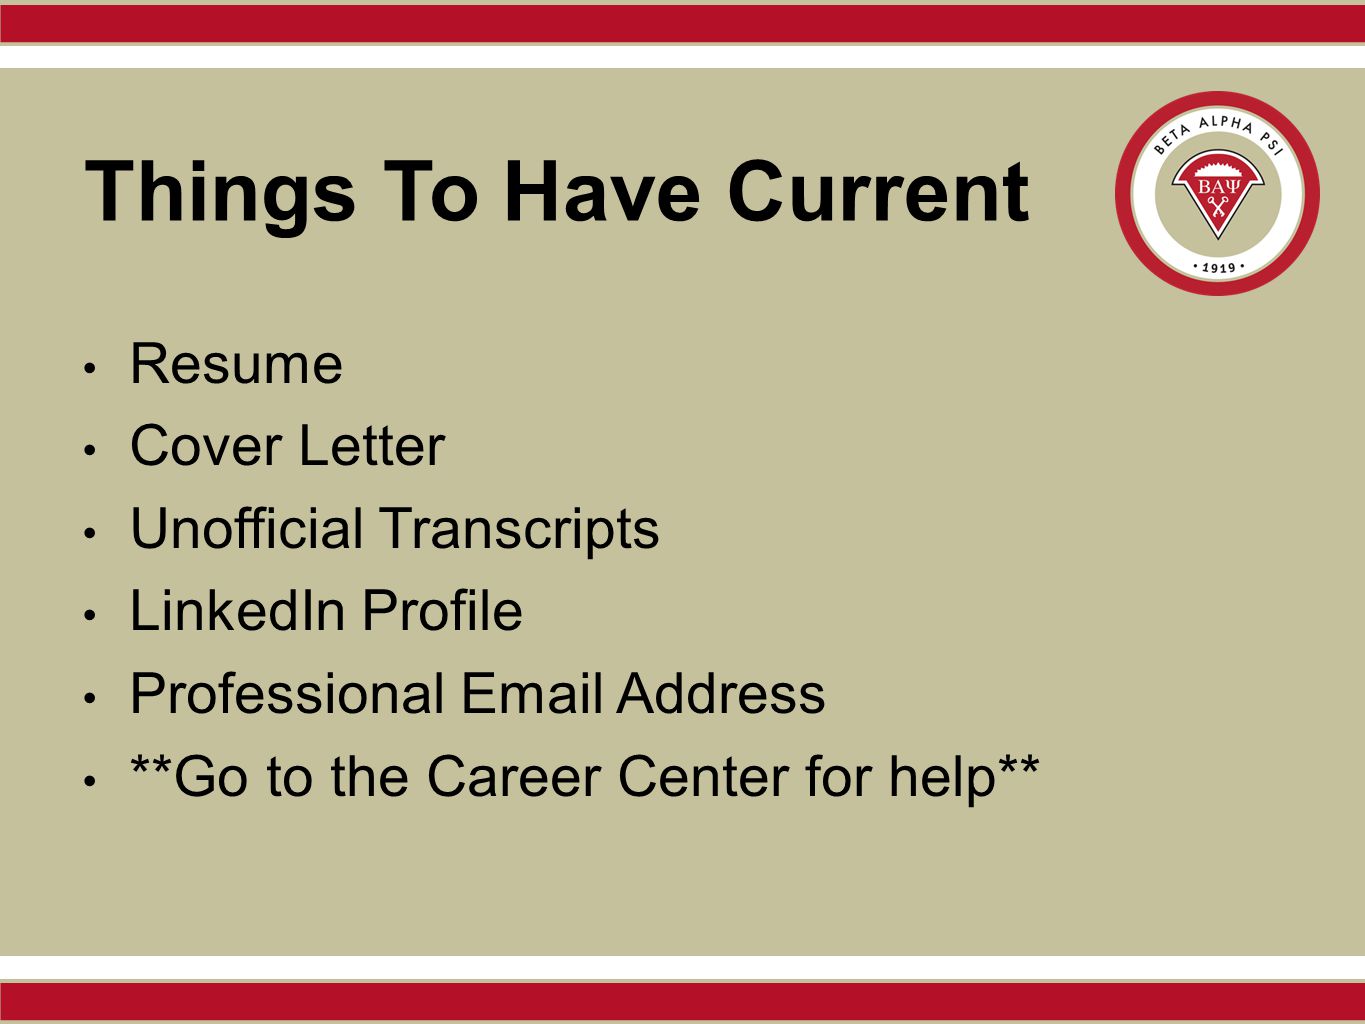 Things To Have Current Resume Cover Letter Unofficial Transcripts LinkedIn Profile Professional  Address **Go to the Career Center for help**